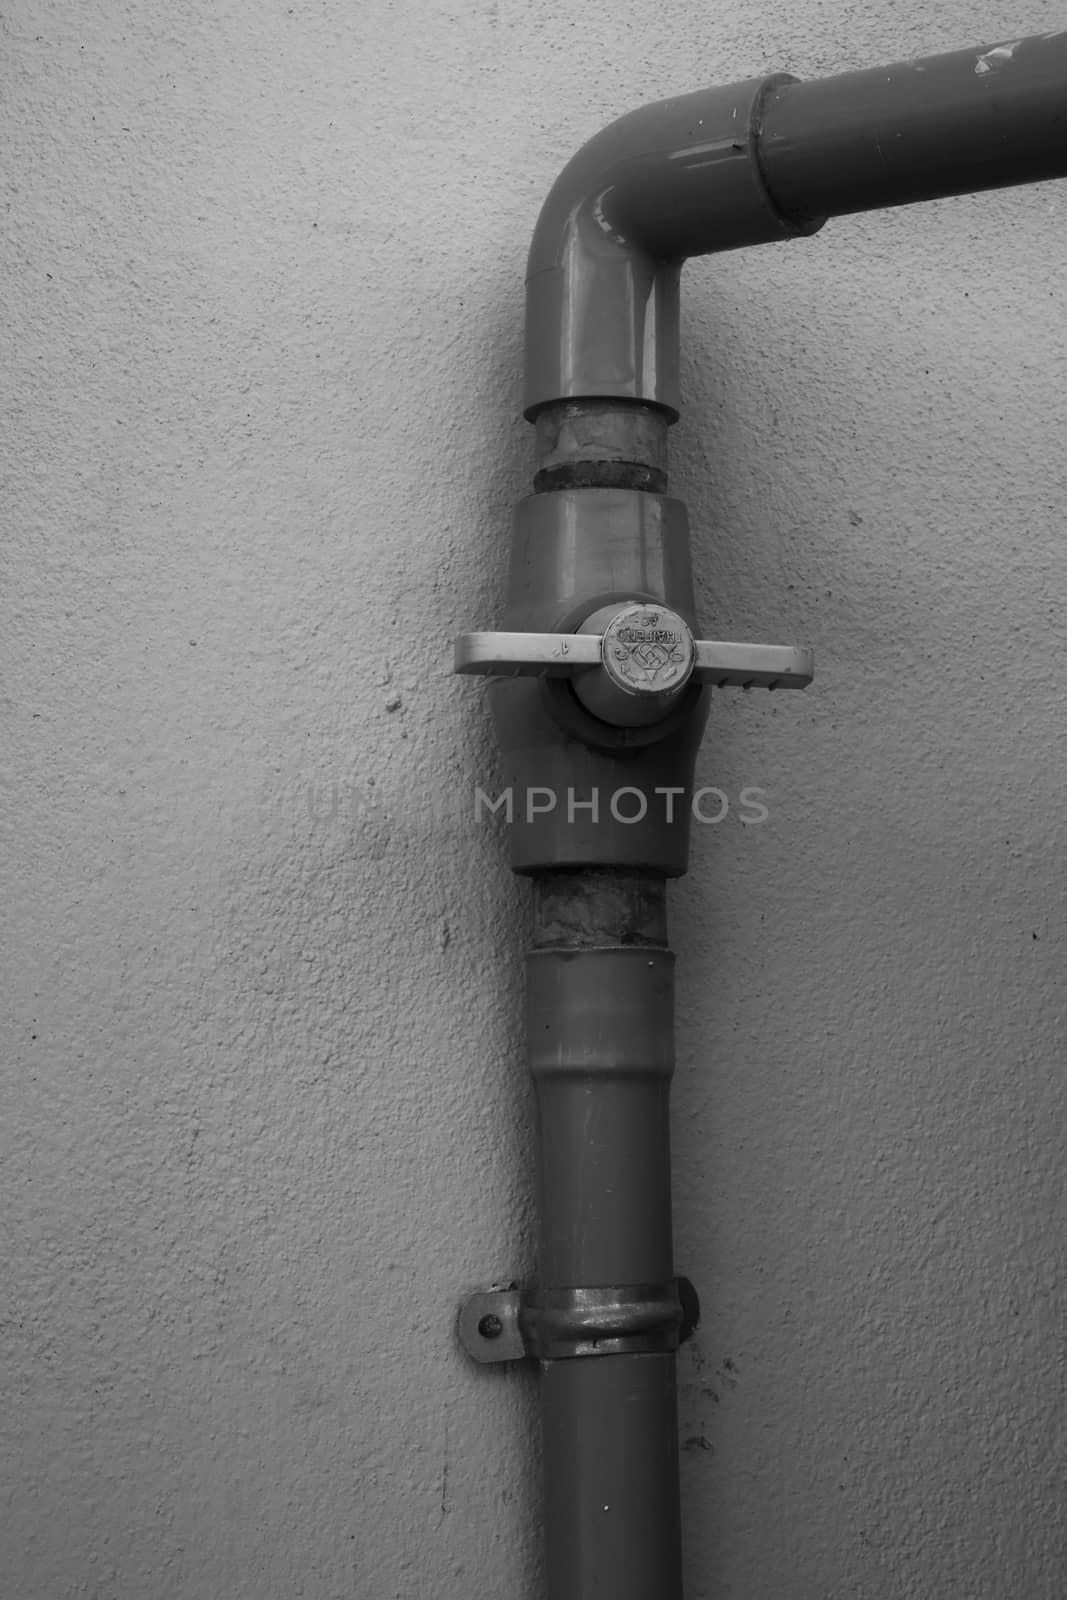 The old water valve mounted on the wall.